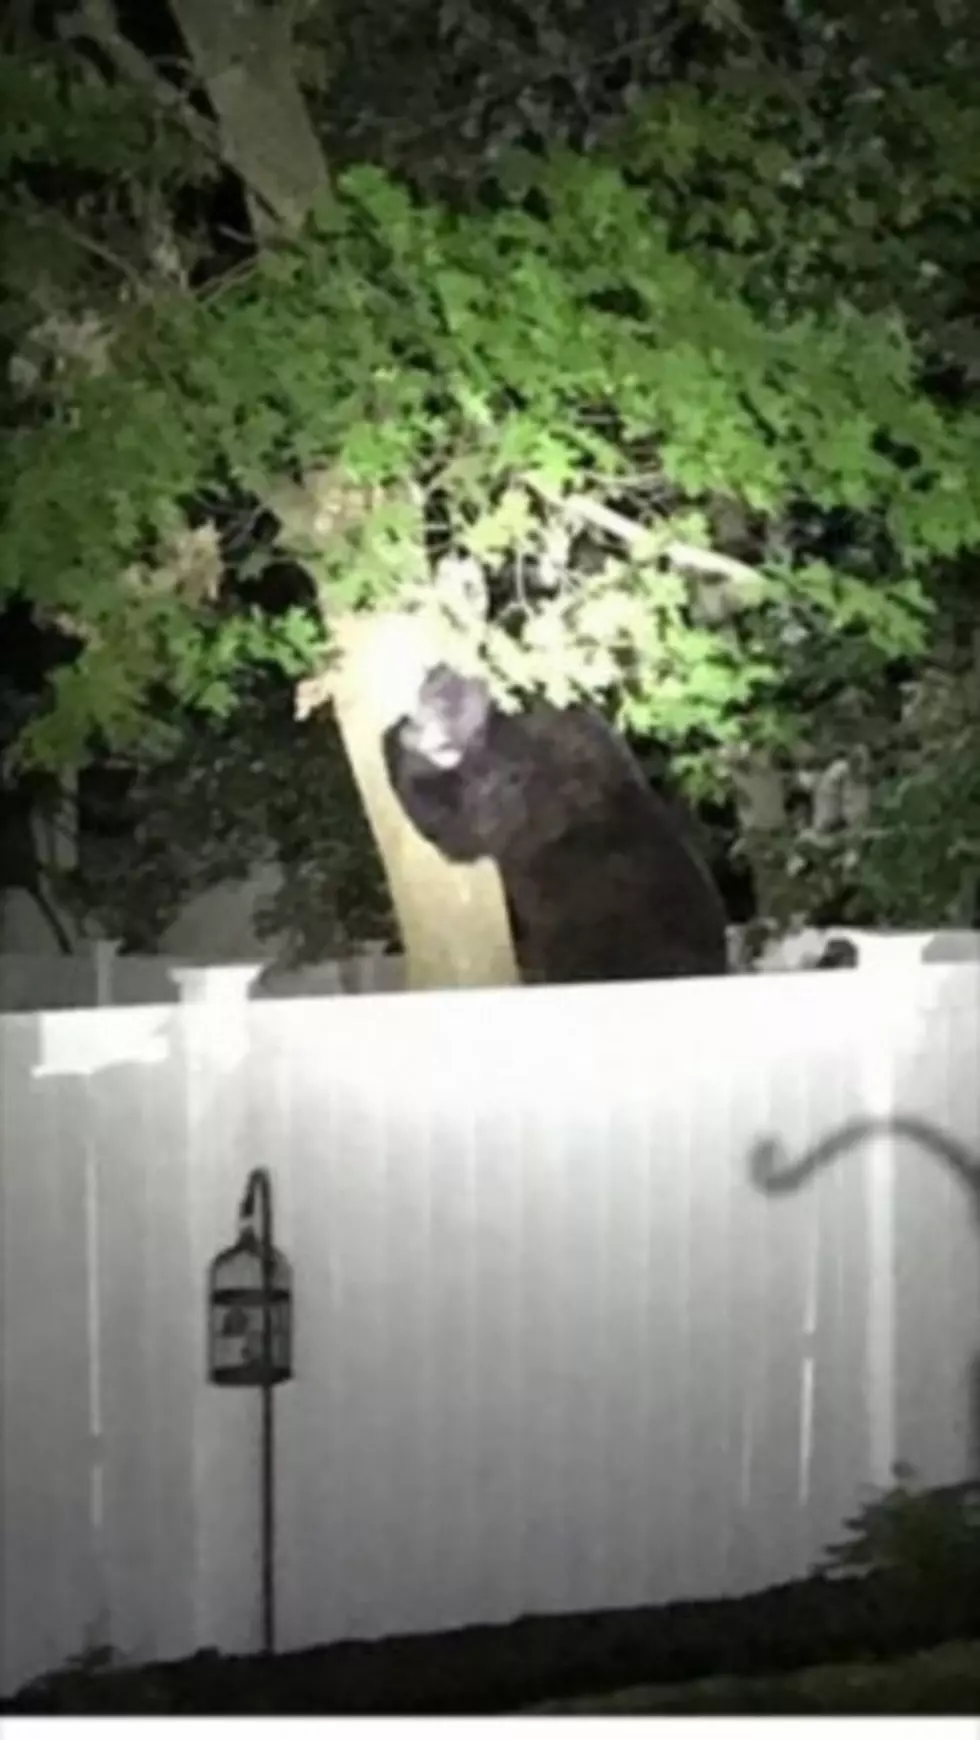 No Lions or Tigers but a bear has been spotted in Manchester Township